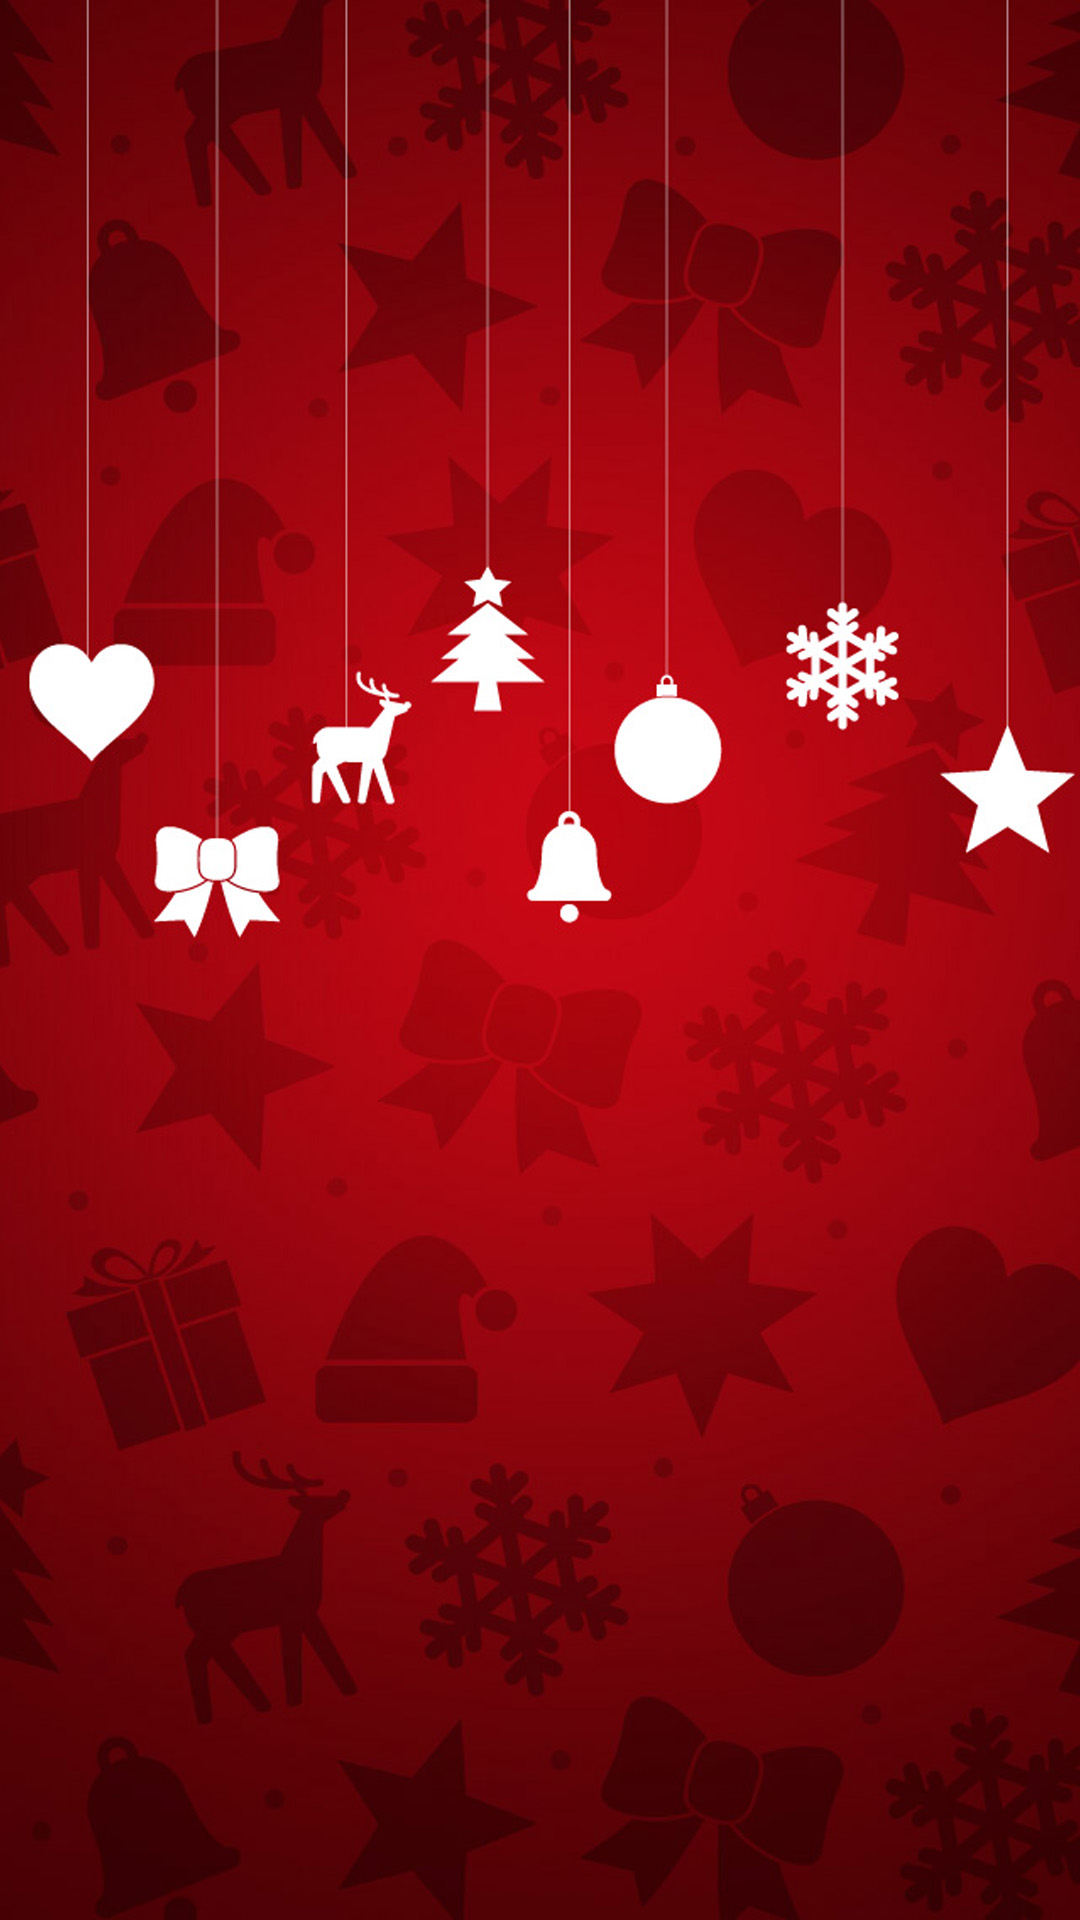 Minimal Christmas Ornaments Red Background Android Wallpaper free